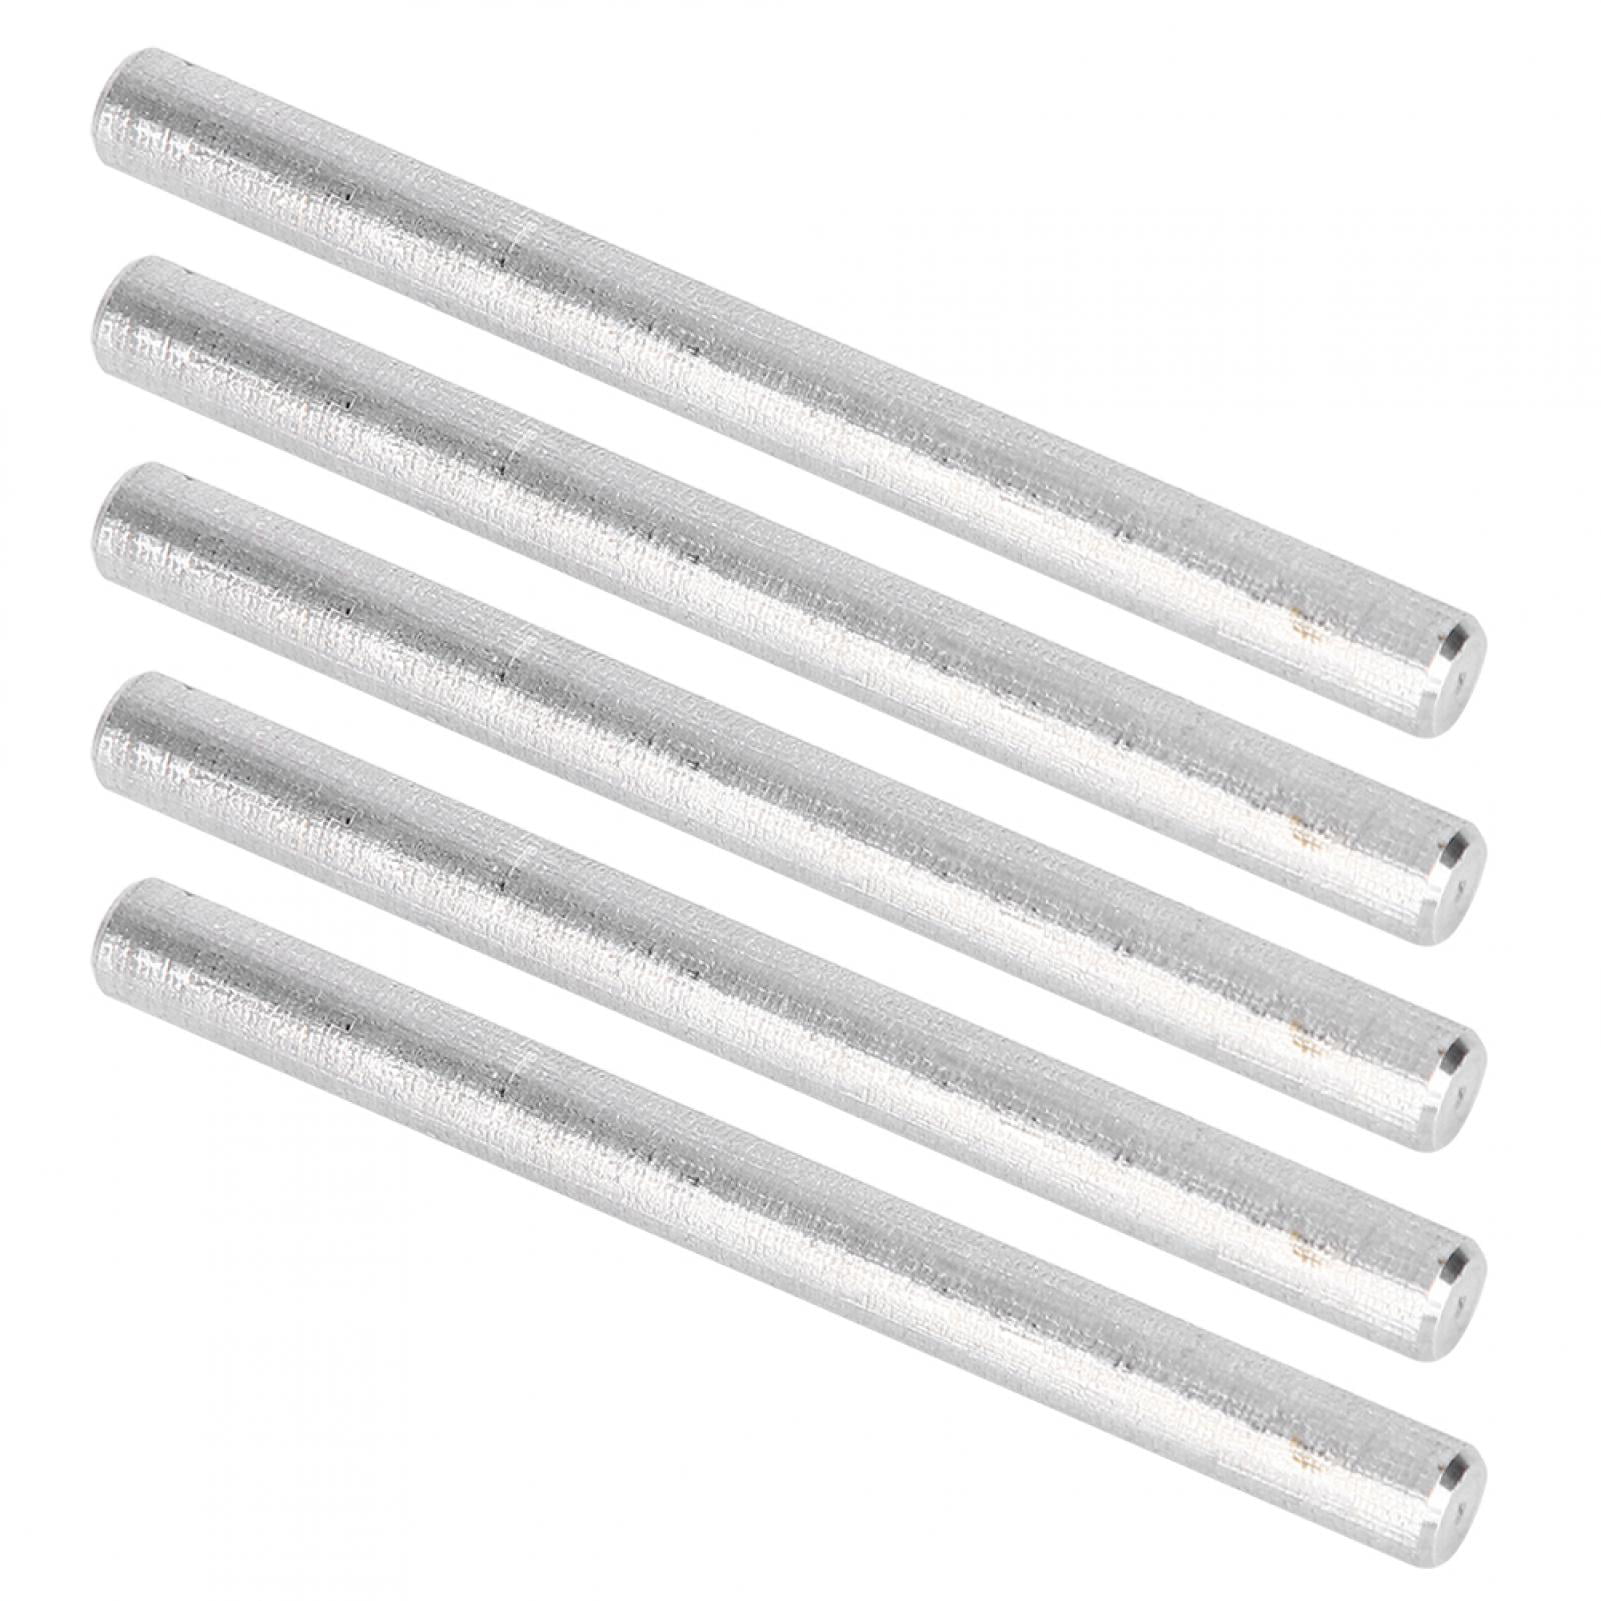 Stainless Steel Shaft 4101‑0006‑0070 5pcs Durable for Industrial Equipment 